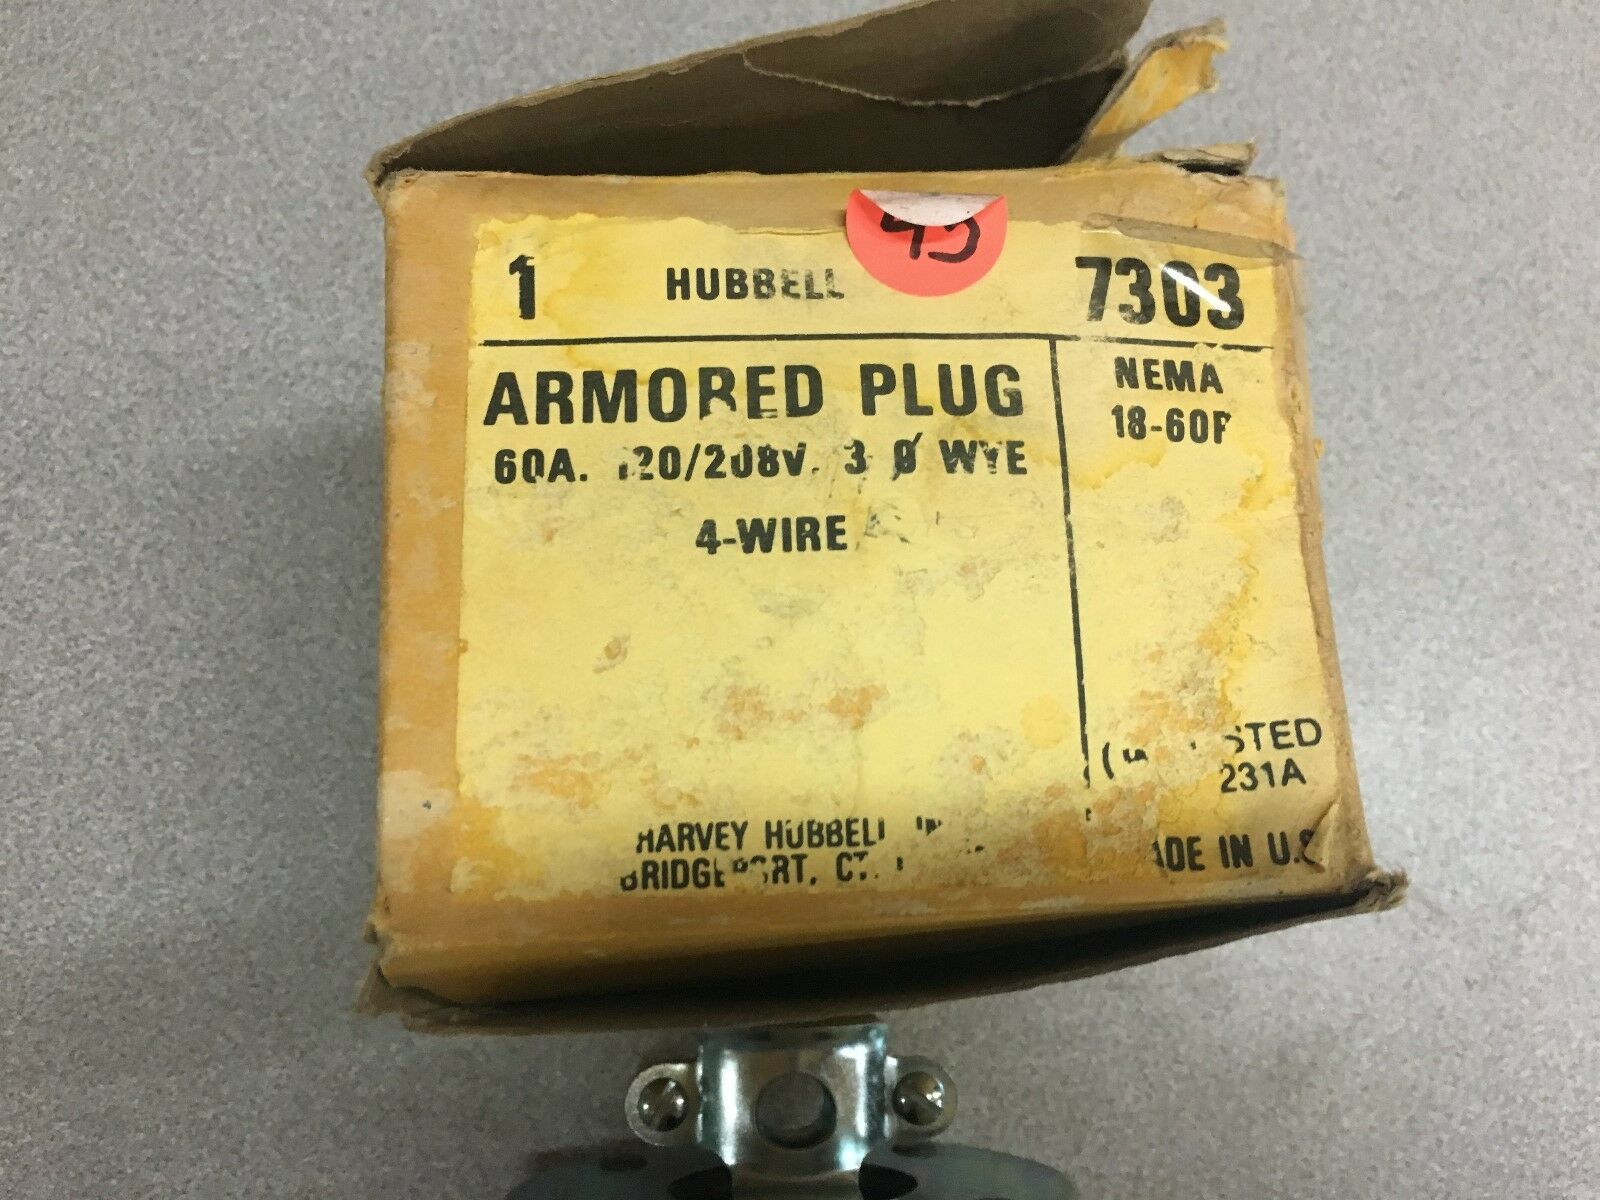 NEW IN BOX HUBBELL ARMORED PLUG 7303